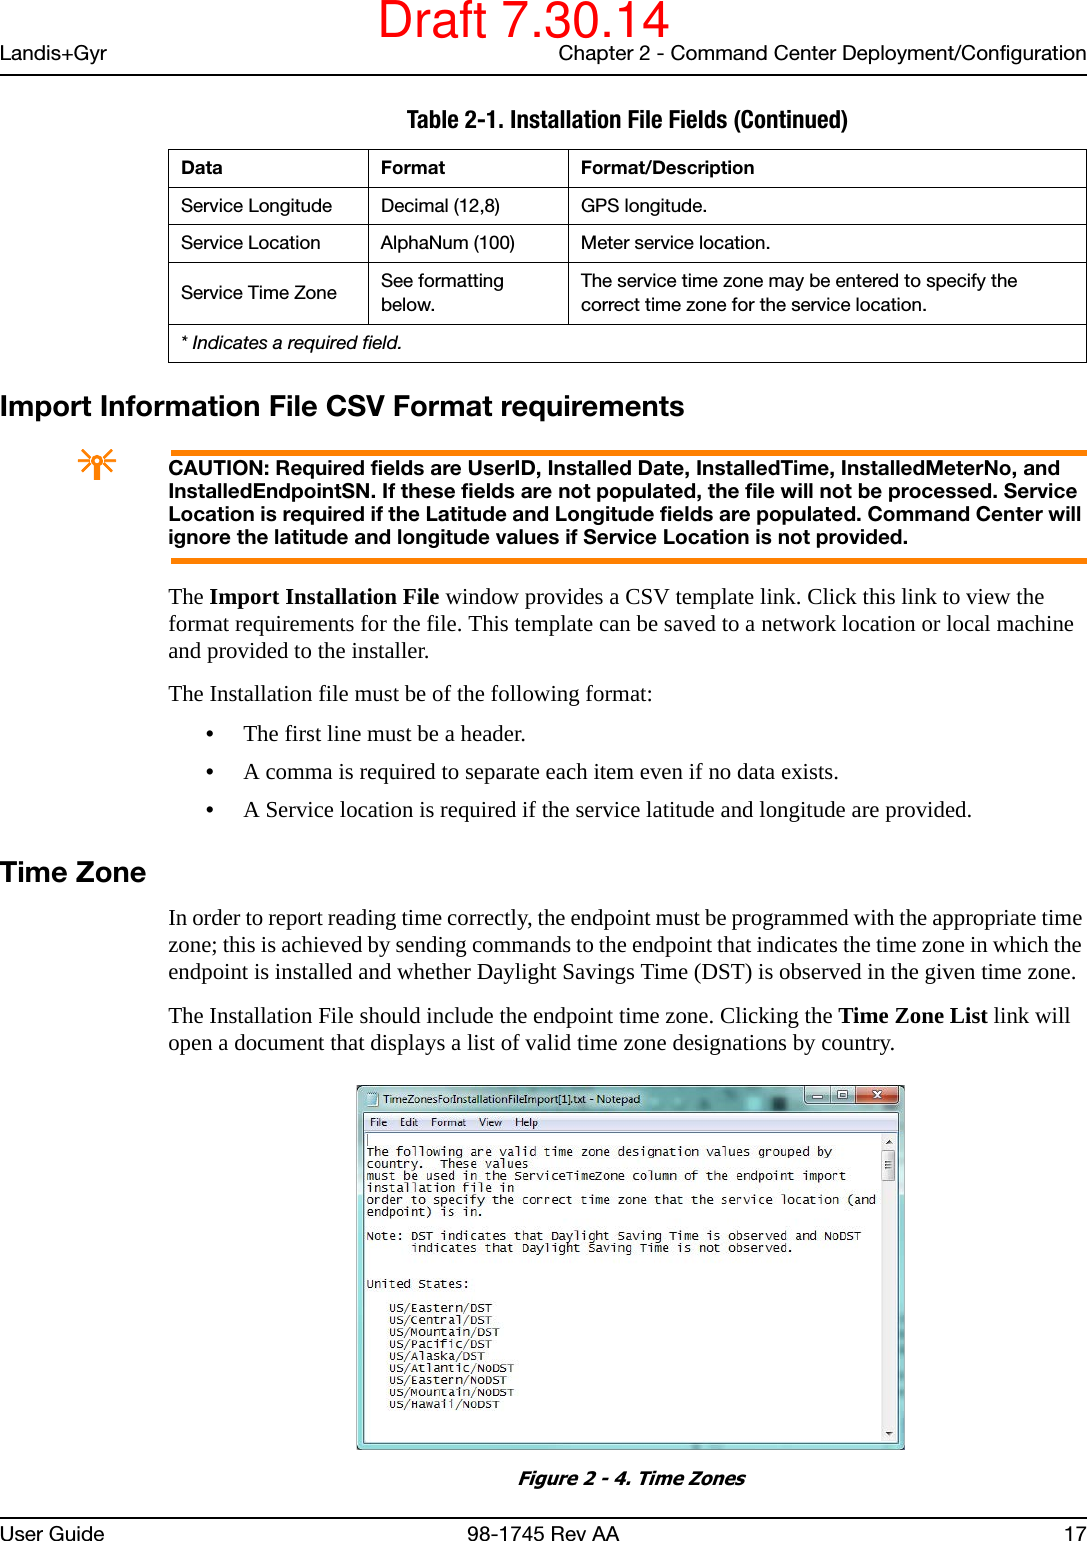 Landis+Gyr Chapter 2 - Command Center Deployment/ConfigurationUser Guide 98-1745 Rev AA 17Import Information File CSV Format requirementsACAUTION: Required fields are UserID, Installed Date, InstalledTime, InstalledMeterNo, and InstalledEndpointSN. If these fields are not populated, the file will not be processed. Service Location is required if the Latitude and Longitude fields are populated. Command Center will ignore the latitude and longitude values if Service Location is not provided.The Import Installation File window provides a CSV template link. Click this link to view the format requirements for the file. This template can be saved to a network location or local machine and provided to the installer.The Installation file must be of the following format:•The first line must be a header.•A comma is required to separate each item even if no data exists.•A Service location is required if the service latitude and longitude are provided.Time ZoneIn order to report reading time correctly, the endpoint must be programmed with the appropriate time zone; this is achieved by sending commands to the endpoint that indicates the time zone in which the endpoint is installed and whether Daylight Savings Time (DST) is observed in the given time zone.The Installation File should include the endpoint time zone. Clicking the Time Zone List link will open a document that displays a list of valid time zone designations by country. Figure 2 - 4. Time ZonesService Longitude Decimal (12,8) GPS longitude.Service Location AlphaNum (100) Meter service location.Service Time Zone See formatting below.The service time zone may be entered to specify the correct time zone for the service location.Table 2-1. Installation File Fields (Continued)Data Format Format/Description* Indicates a required field.Draft 7.30.14